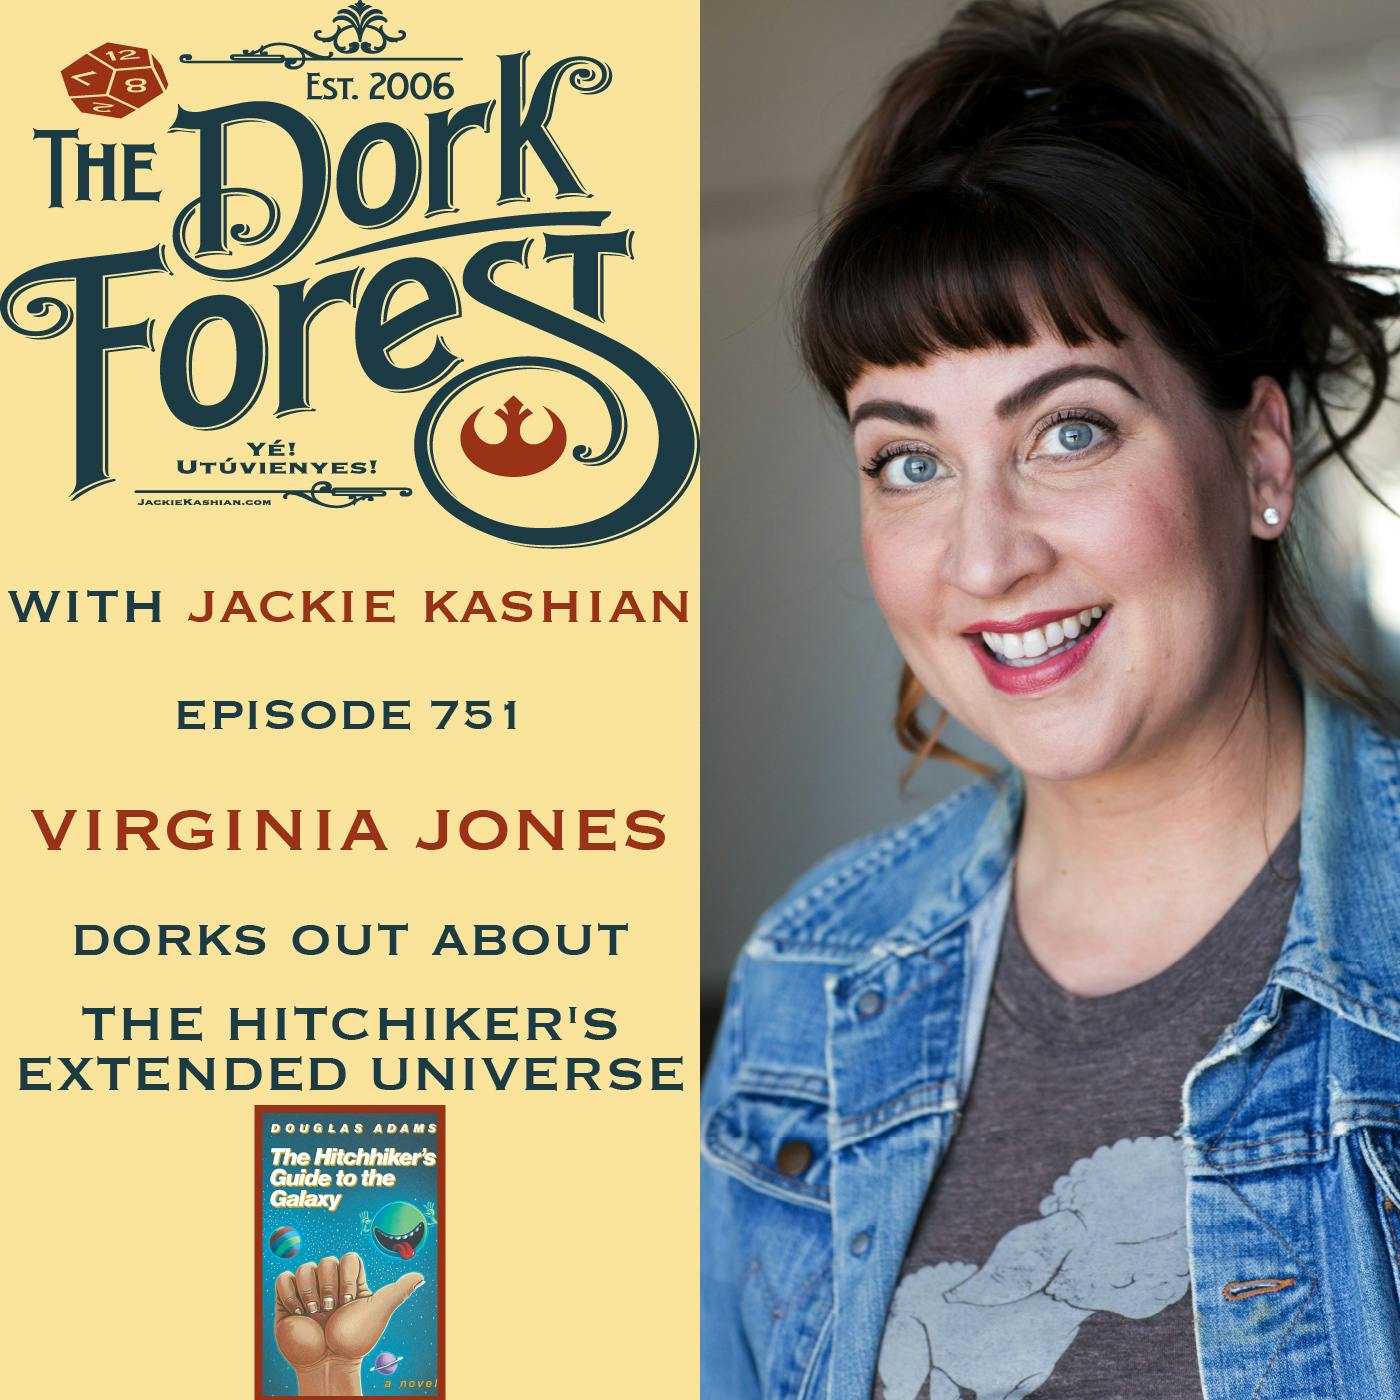 Virginia Jones and the EXTENDED Hitchikers Guide Universe – EP 751